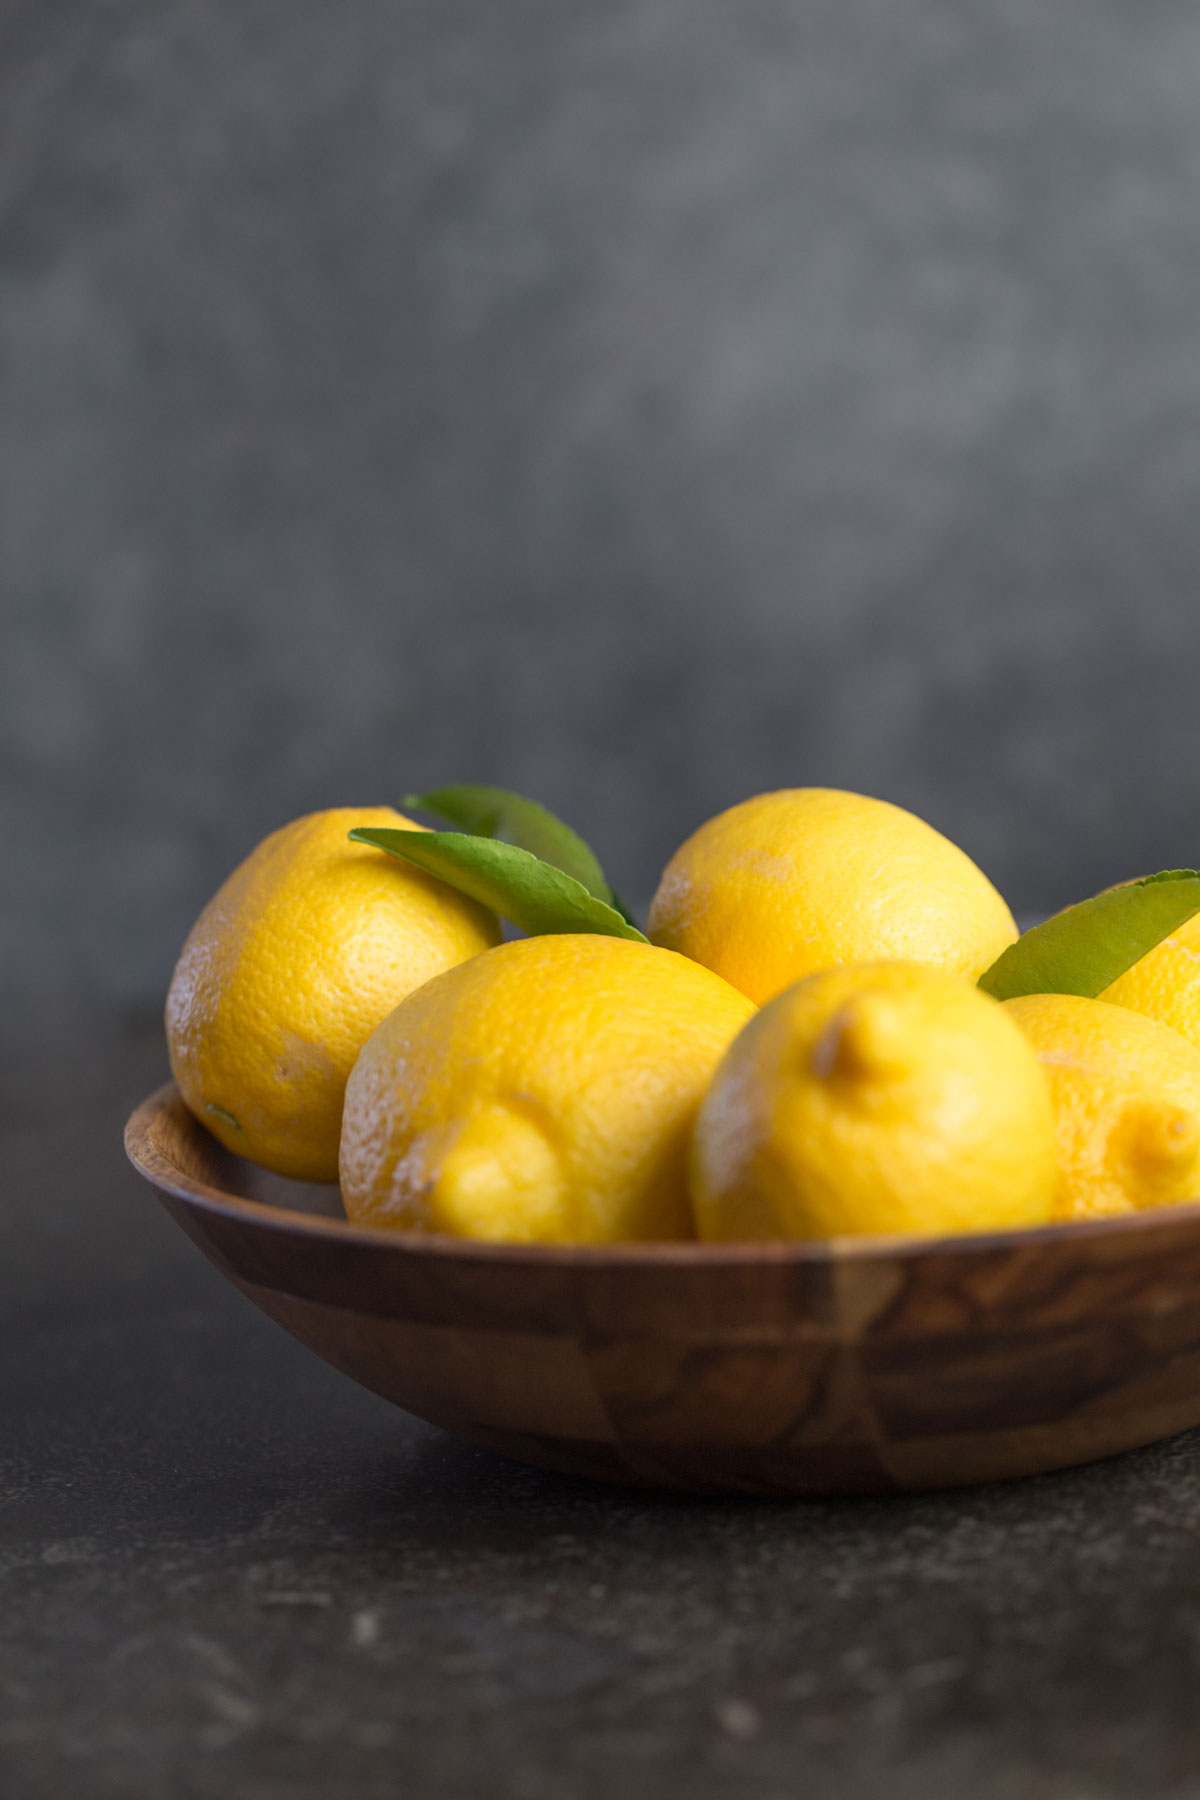 Wooden bowl of lemons with leaves attached from the front view with a dark grey background. 